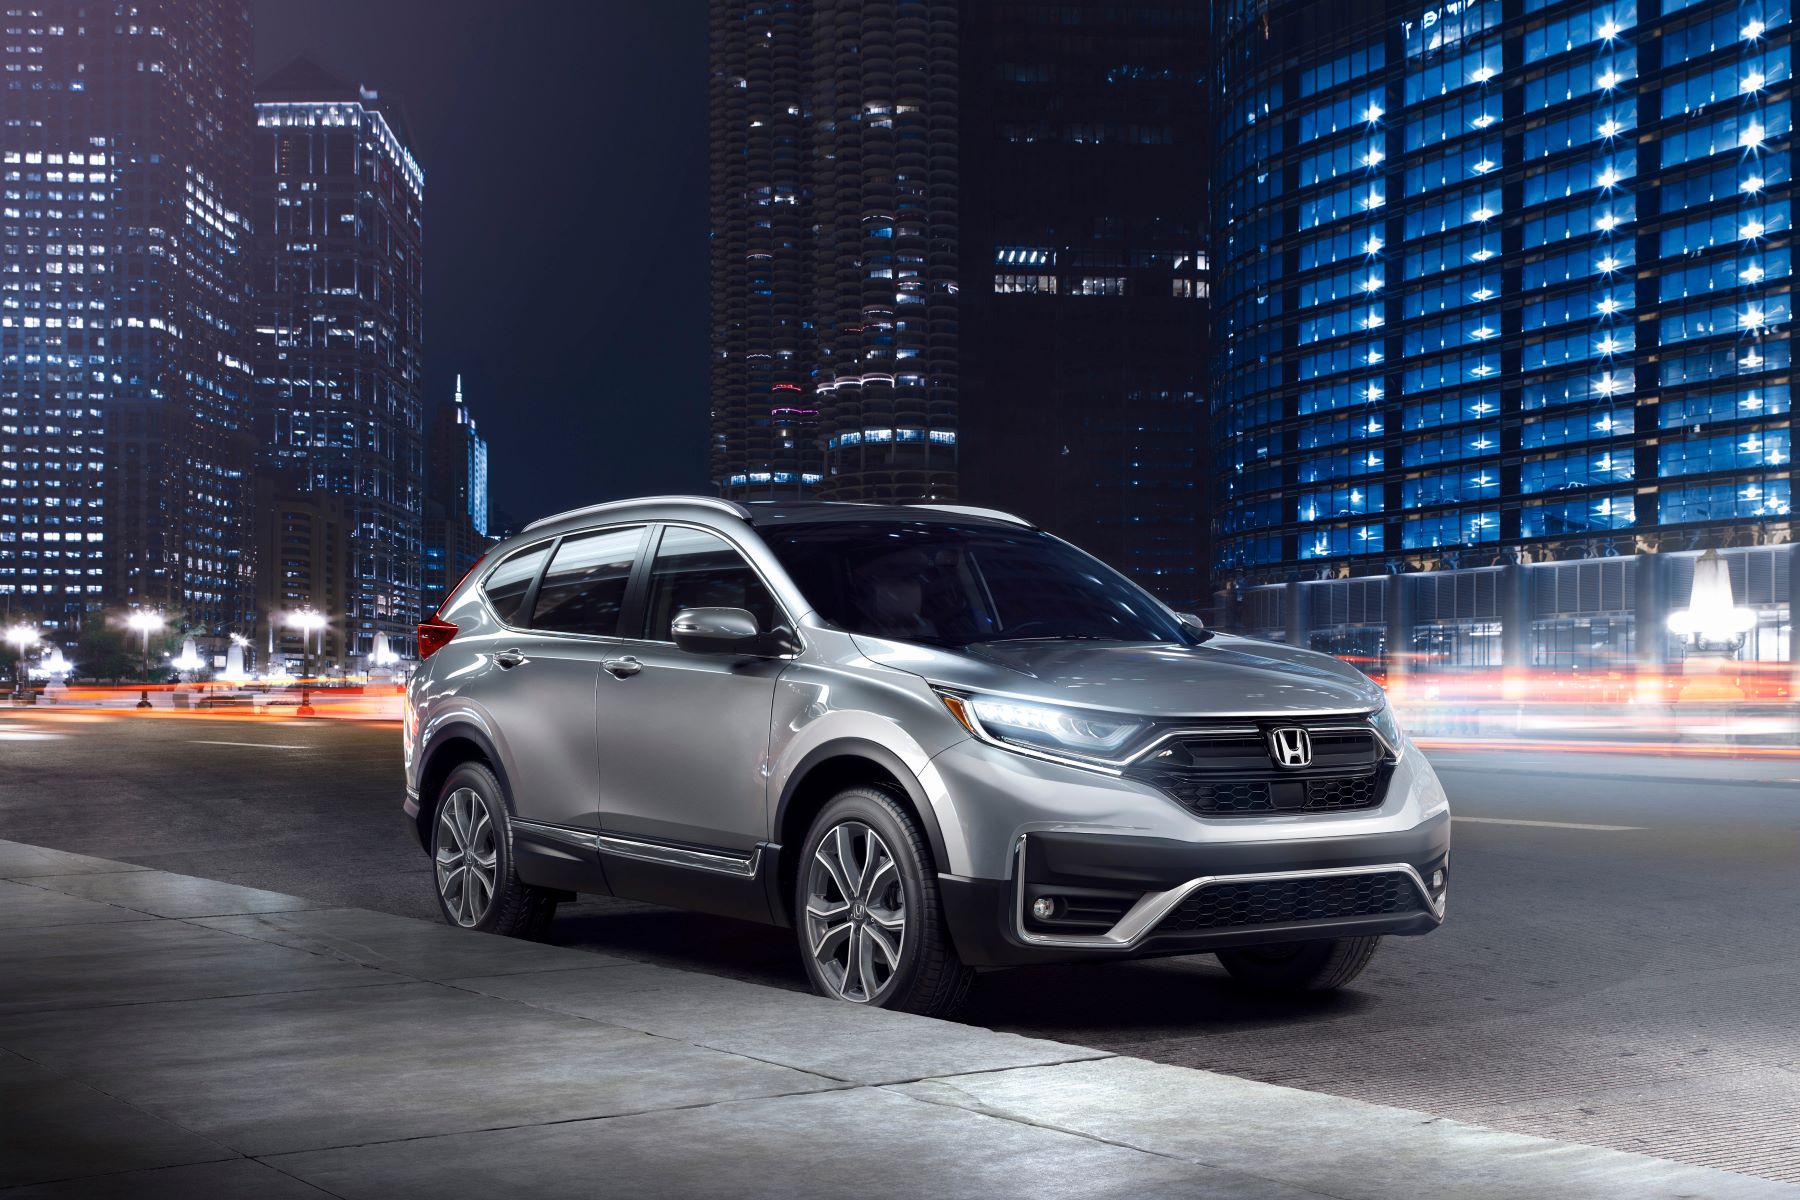 2022 Honda CR-V Touring compact SUV in silver gray parked in the city at night